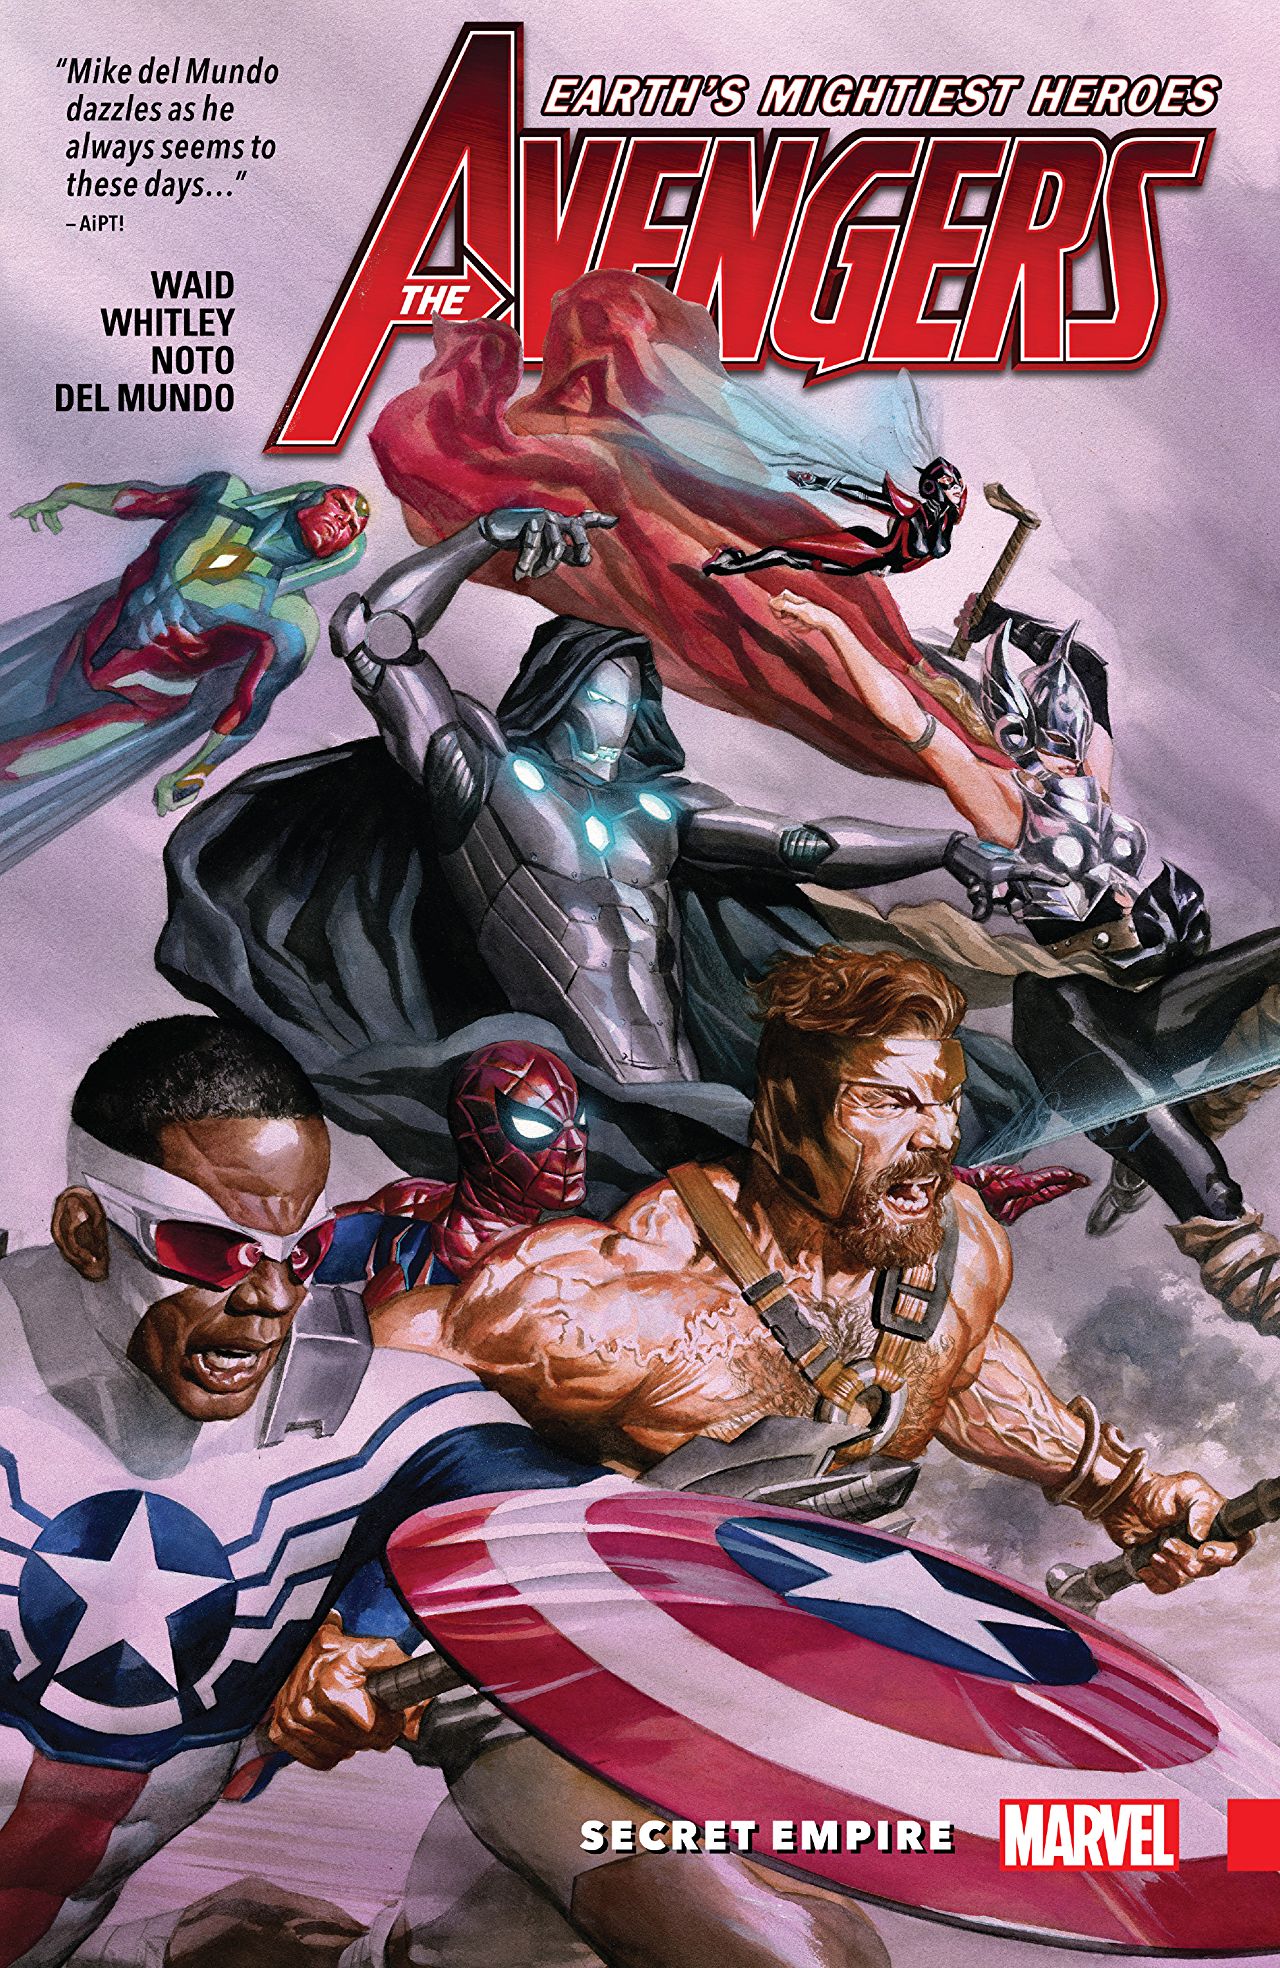 'Avengers: Unleashed Vol. 2: Secret Empire' is a remarkably pretty, yet fractured compilation